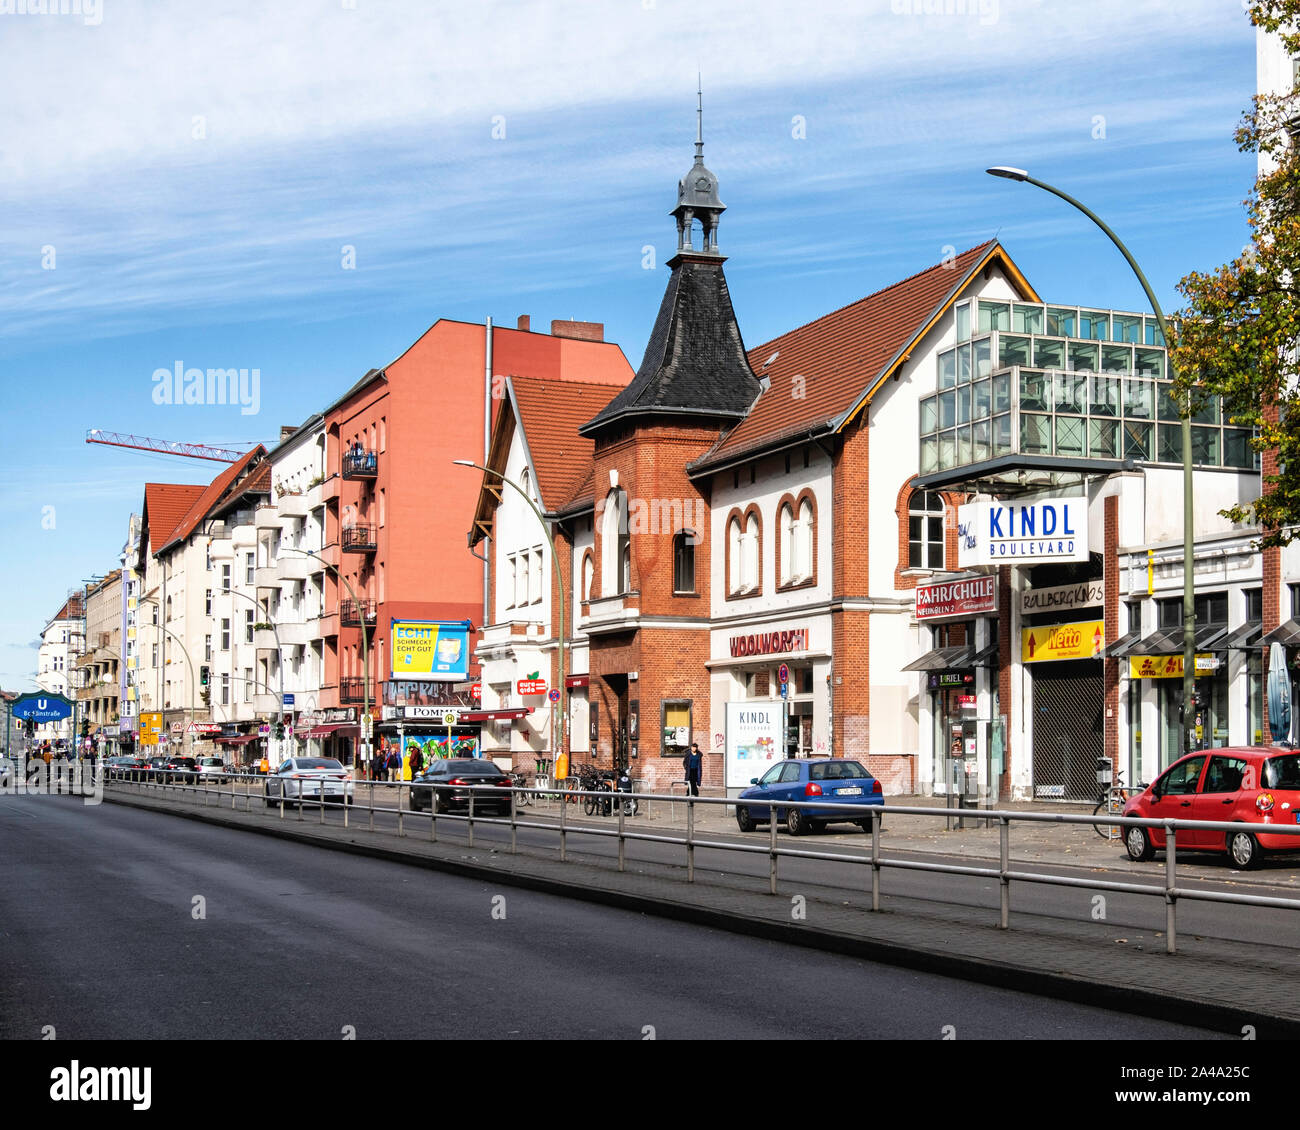 Hermannstrasse street view with shops & apartment buildings In Neukölln, Berlin. Kindl Boulevard, Woolwort store Stock Photo